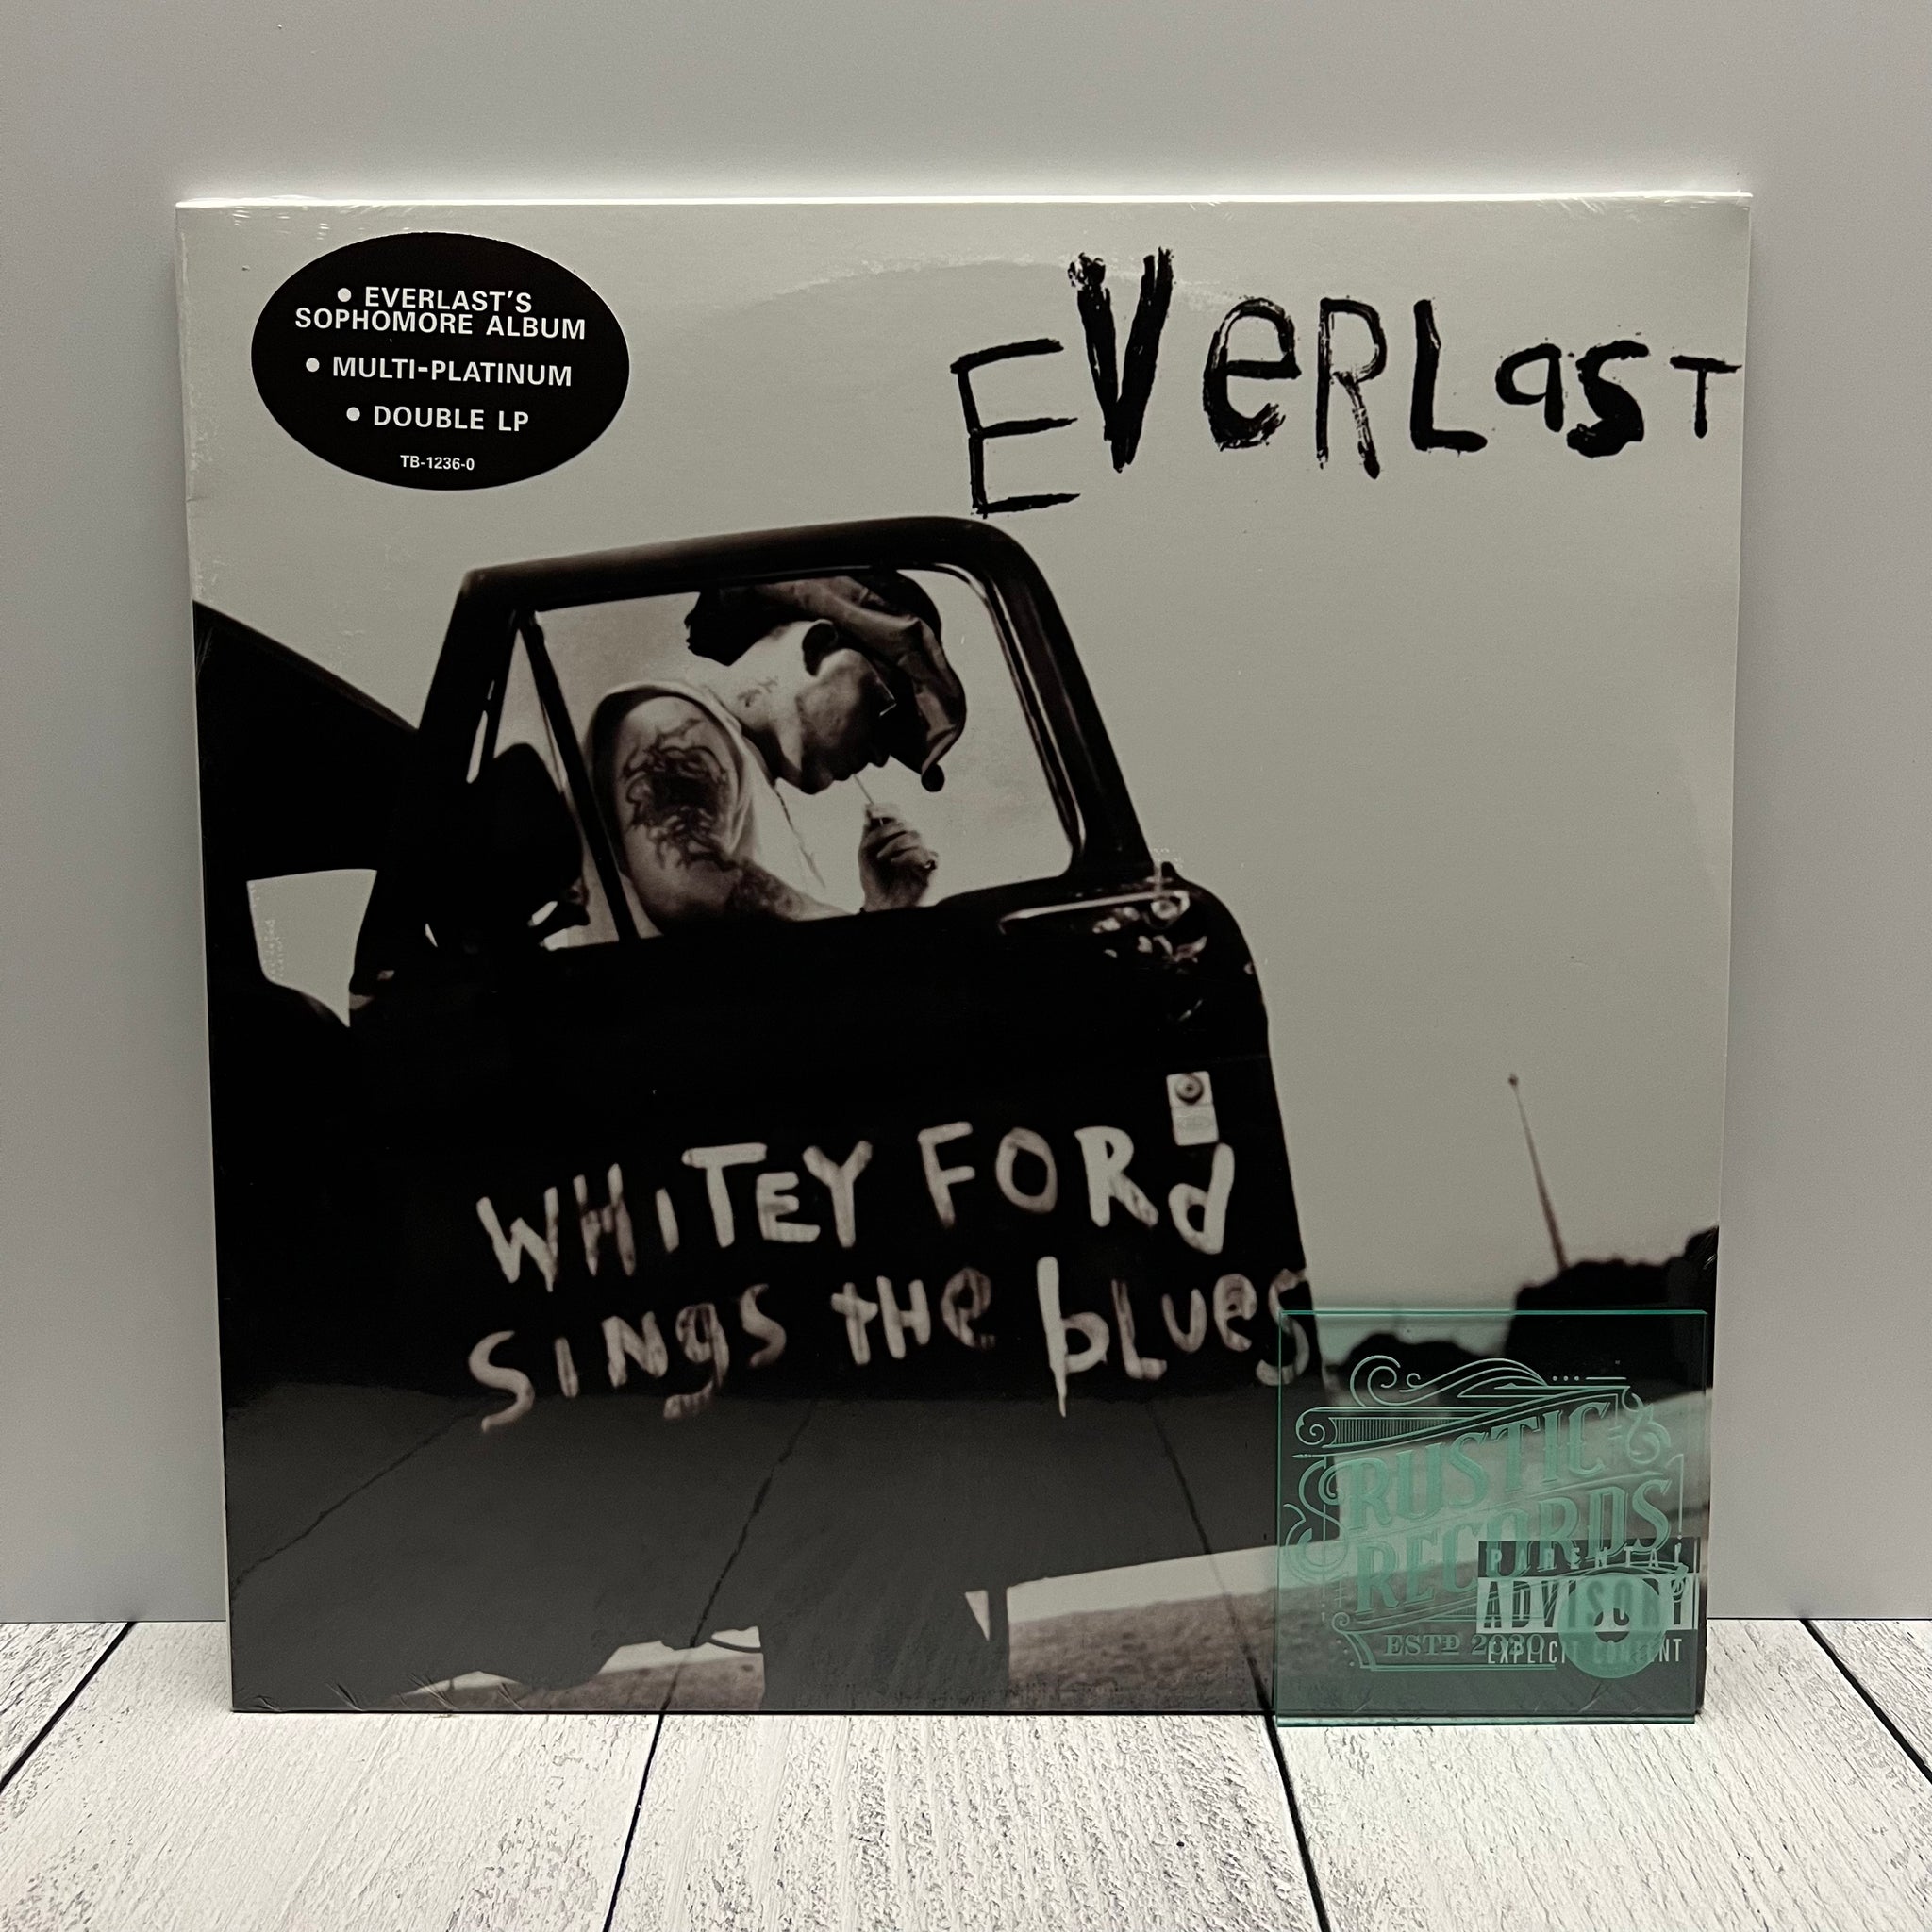 Everlast - Whitey Ford Sings The Blues (RSD Release)